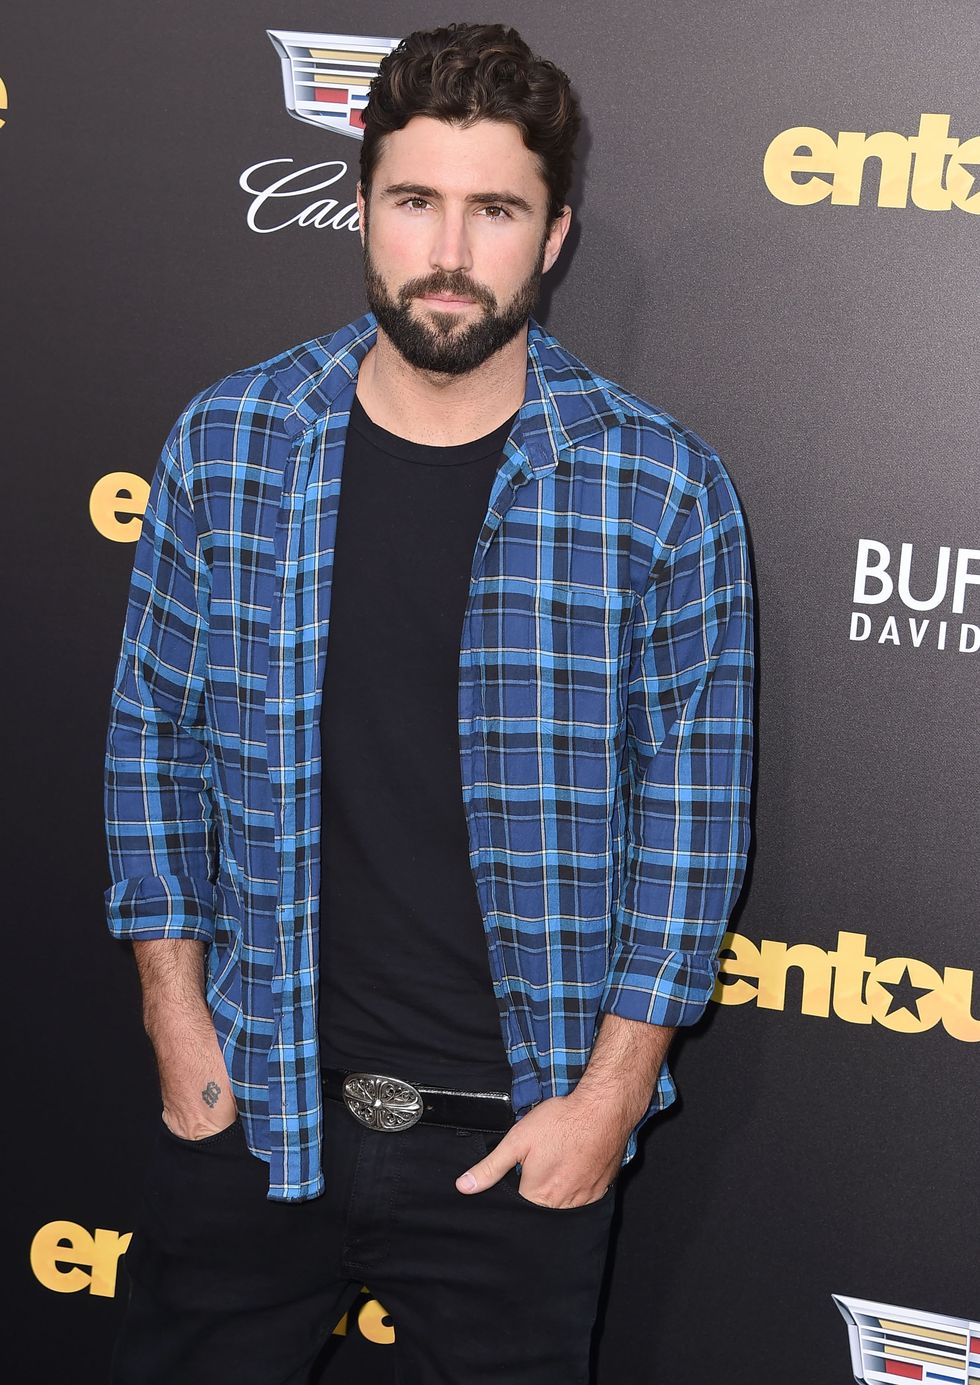 Brody Jenner on the red carpet at the Entourage premiere